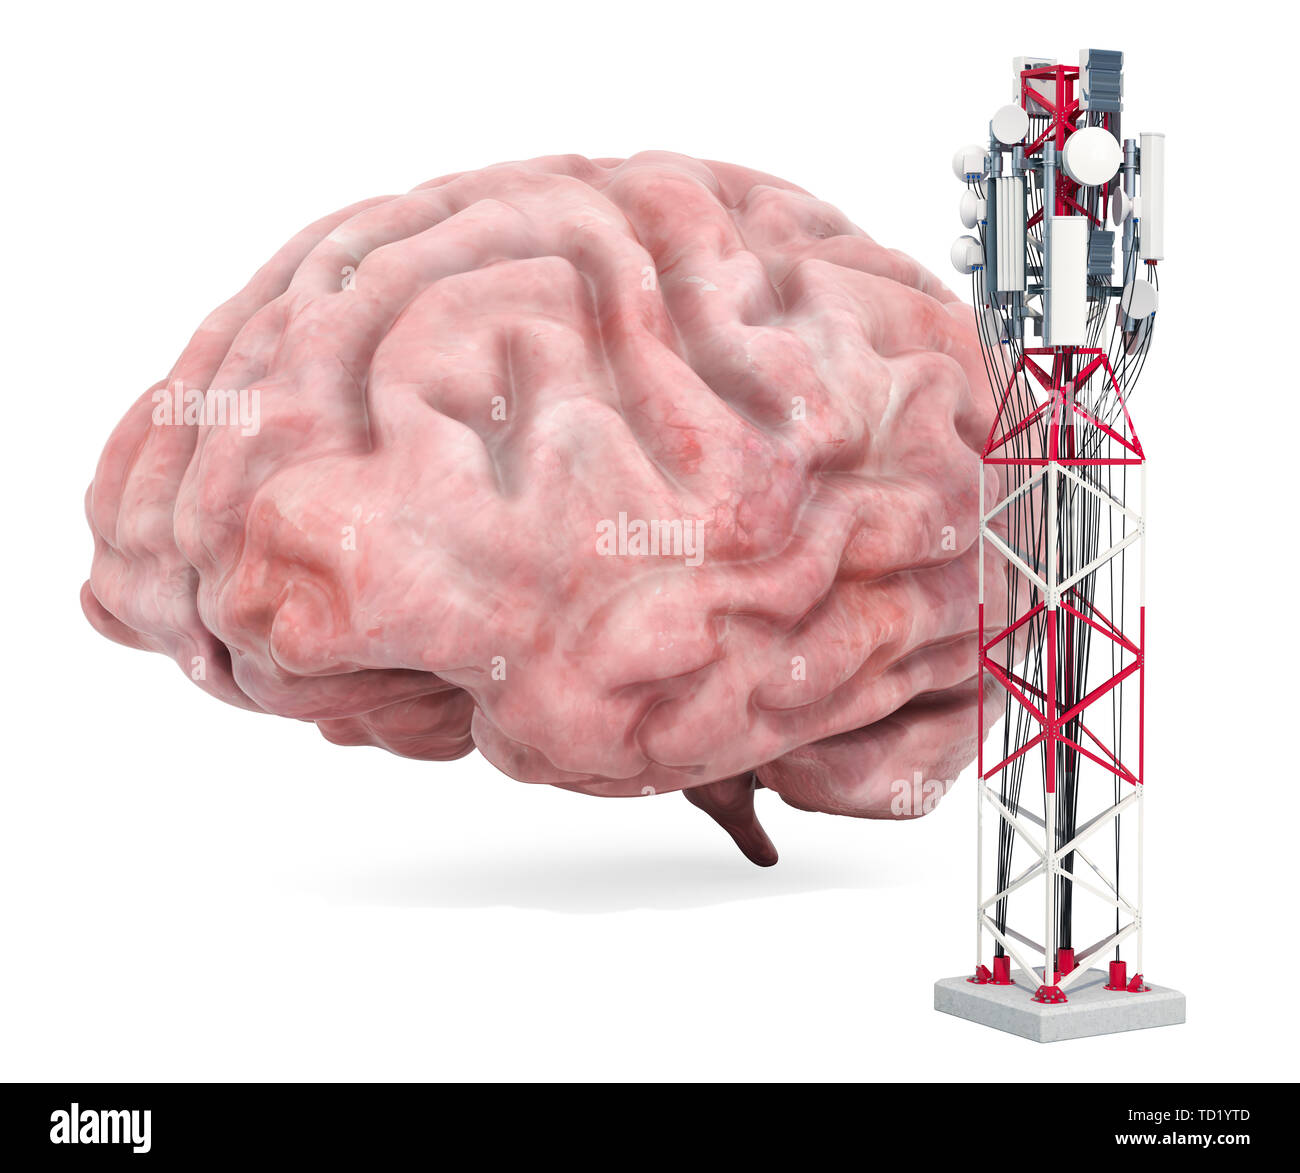 Mobile tower effect on human brain. 3D rendering isolated on white background Stock Photo